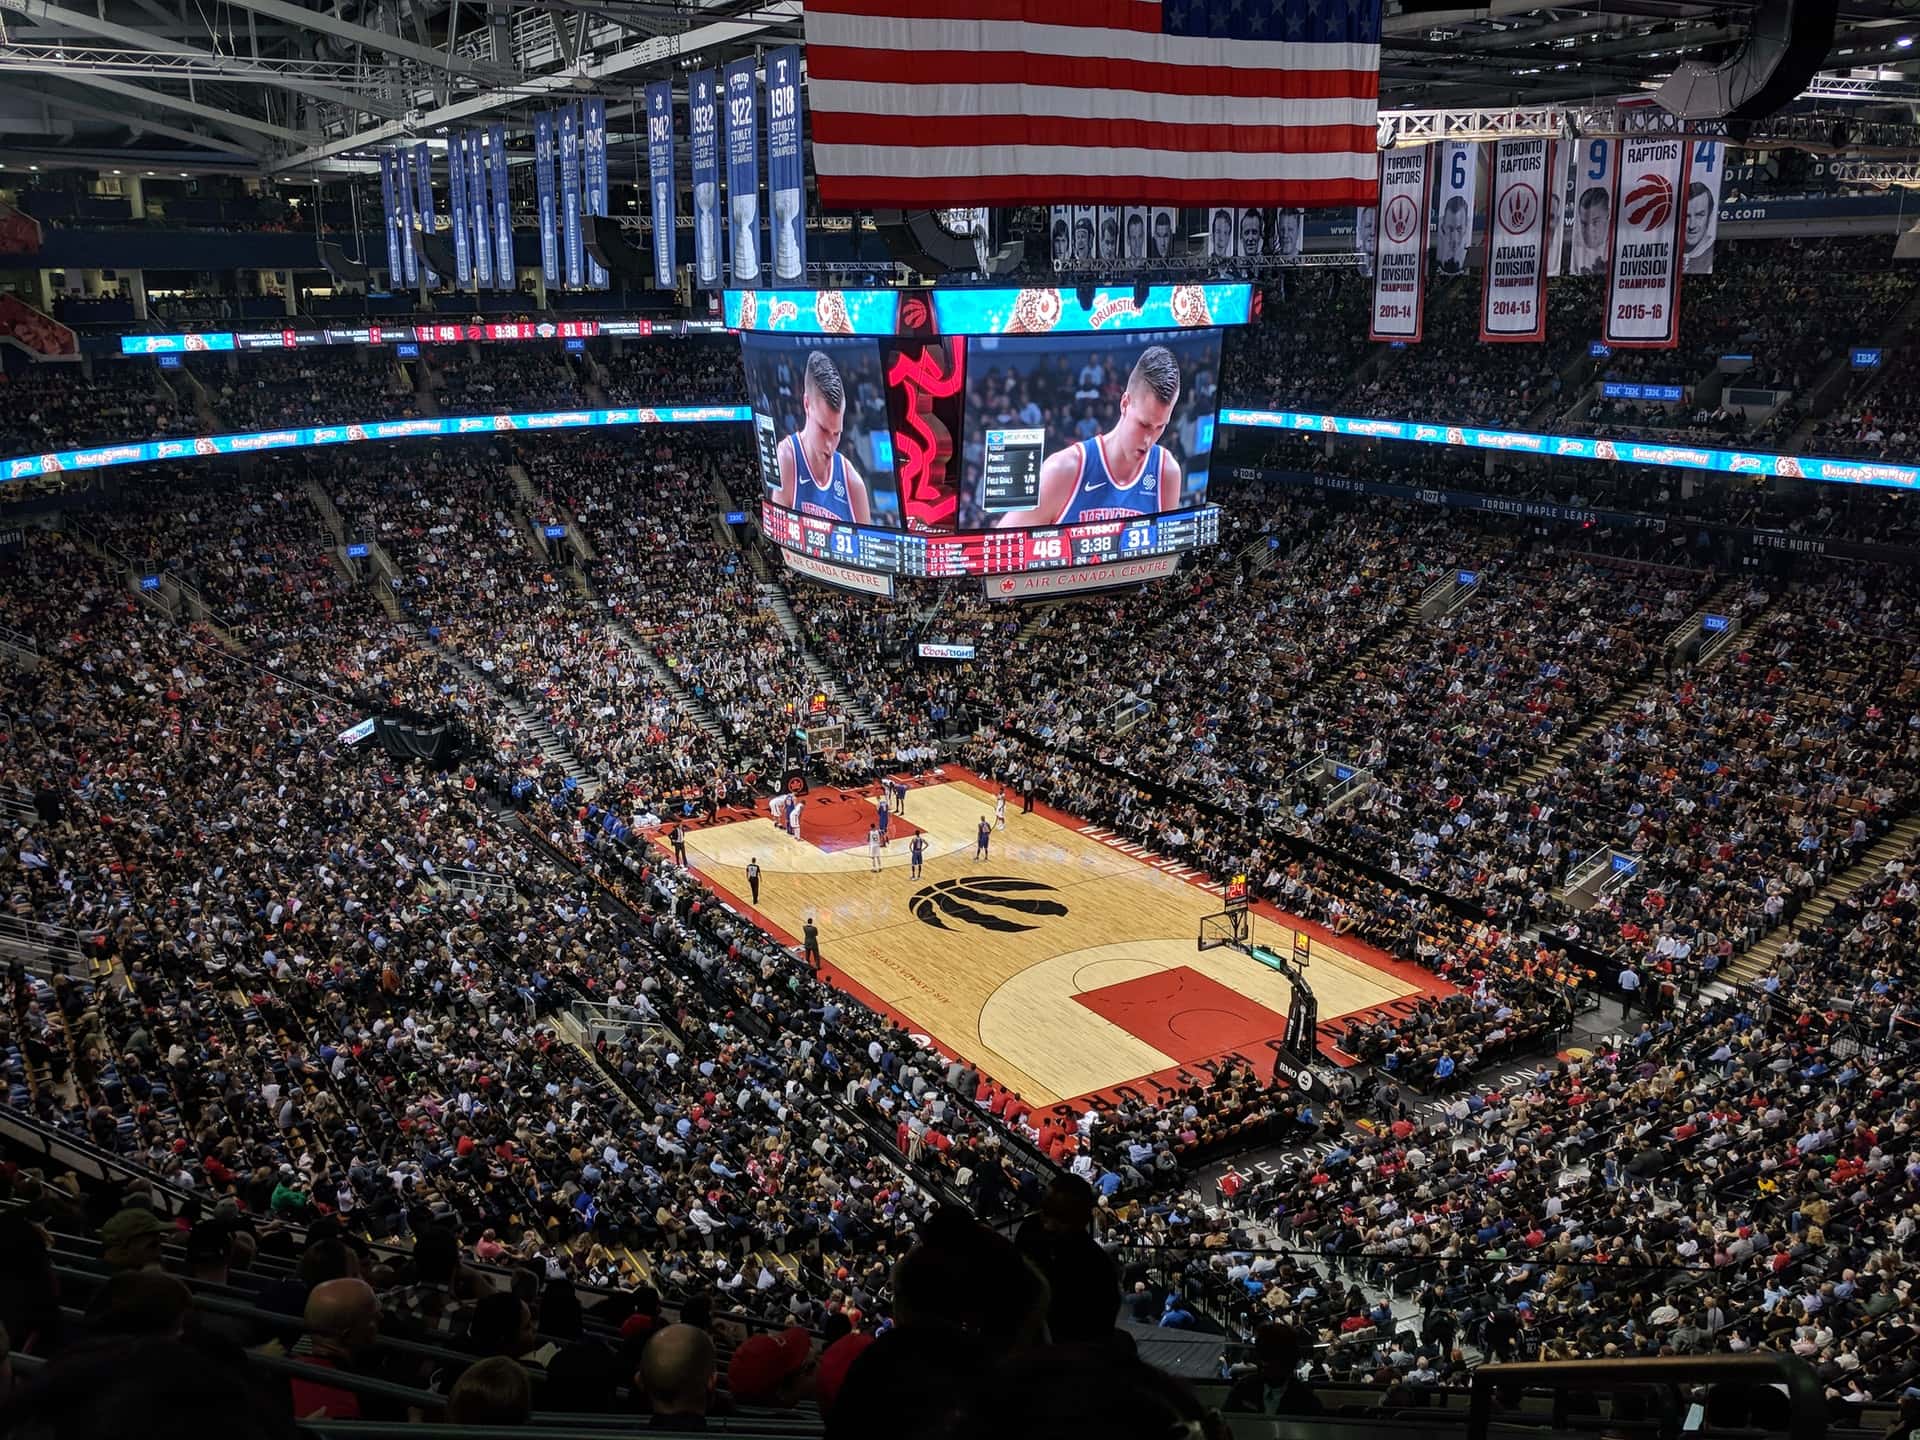 Top 10 Countries Where Basketball is Popular